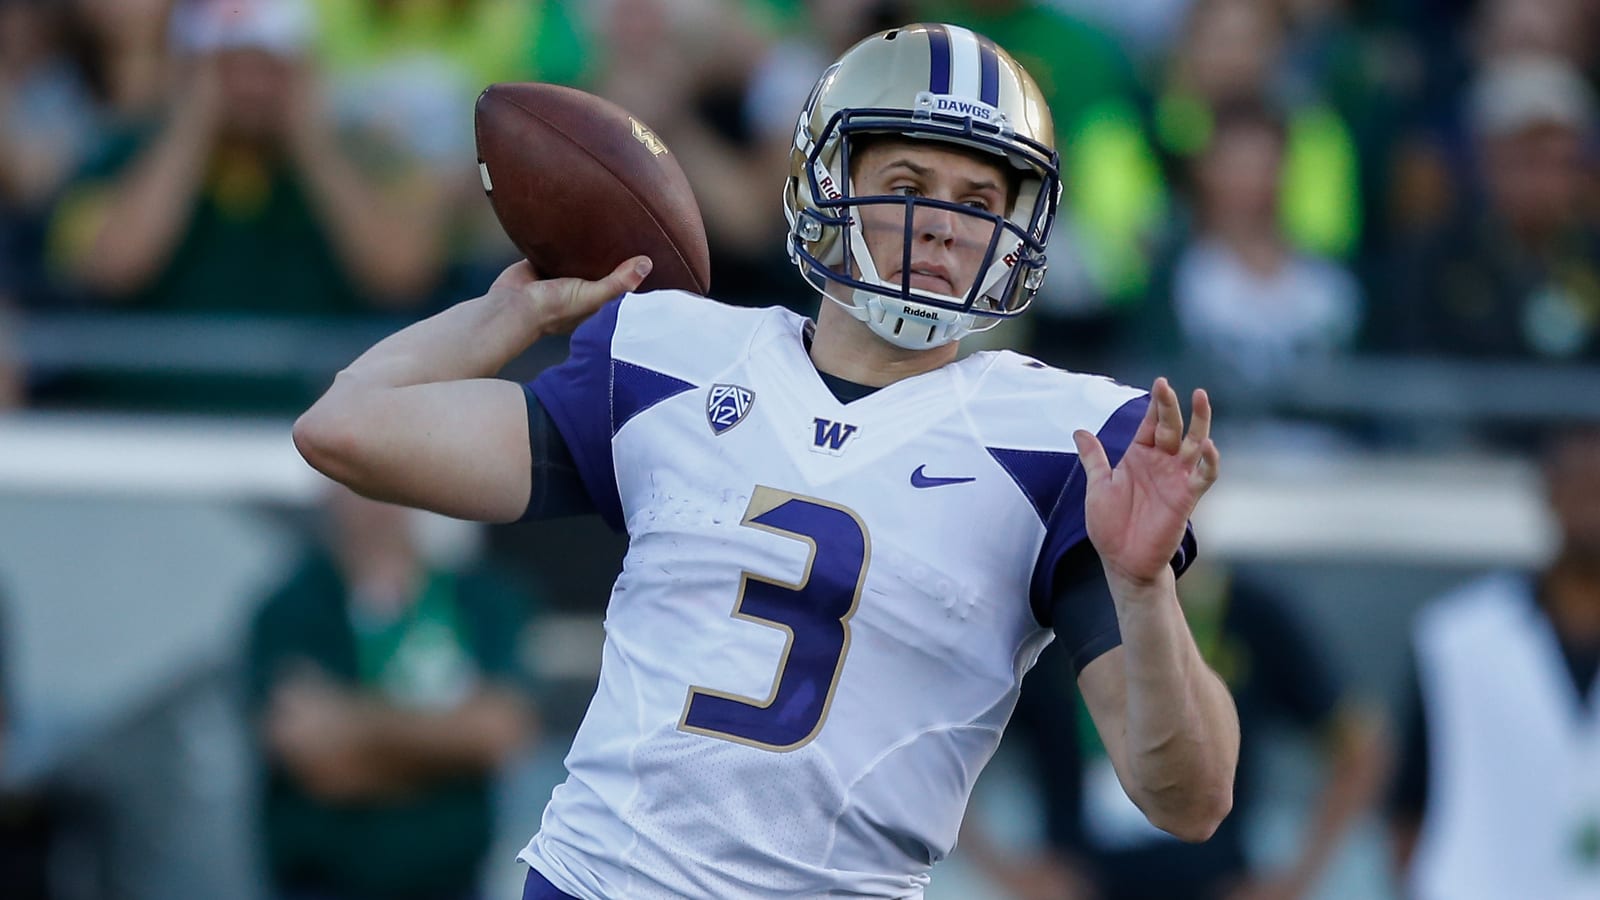 Crash Course Week 7: Can the Huskies crack the playoff race?